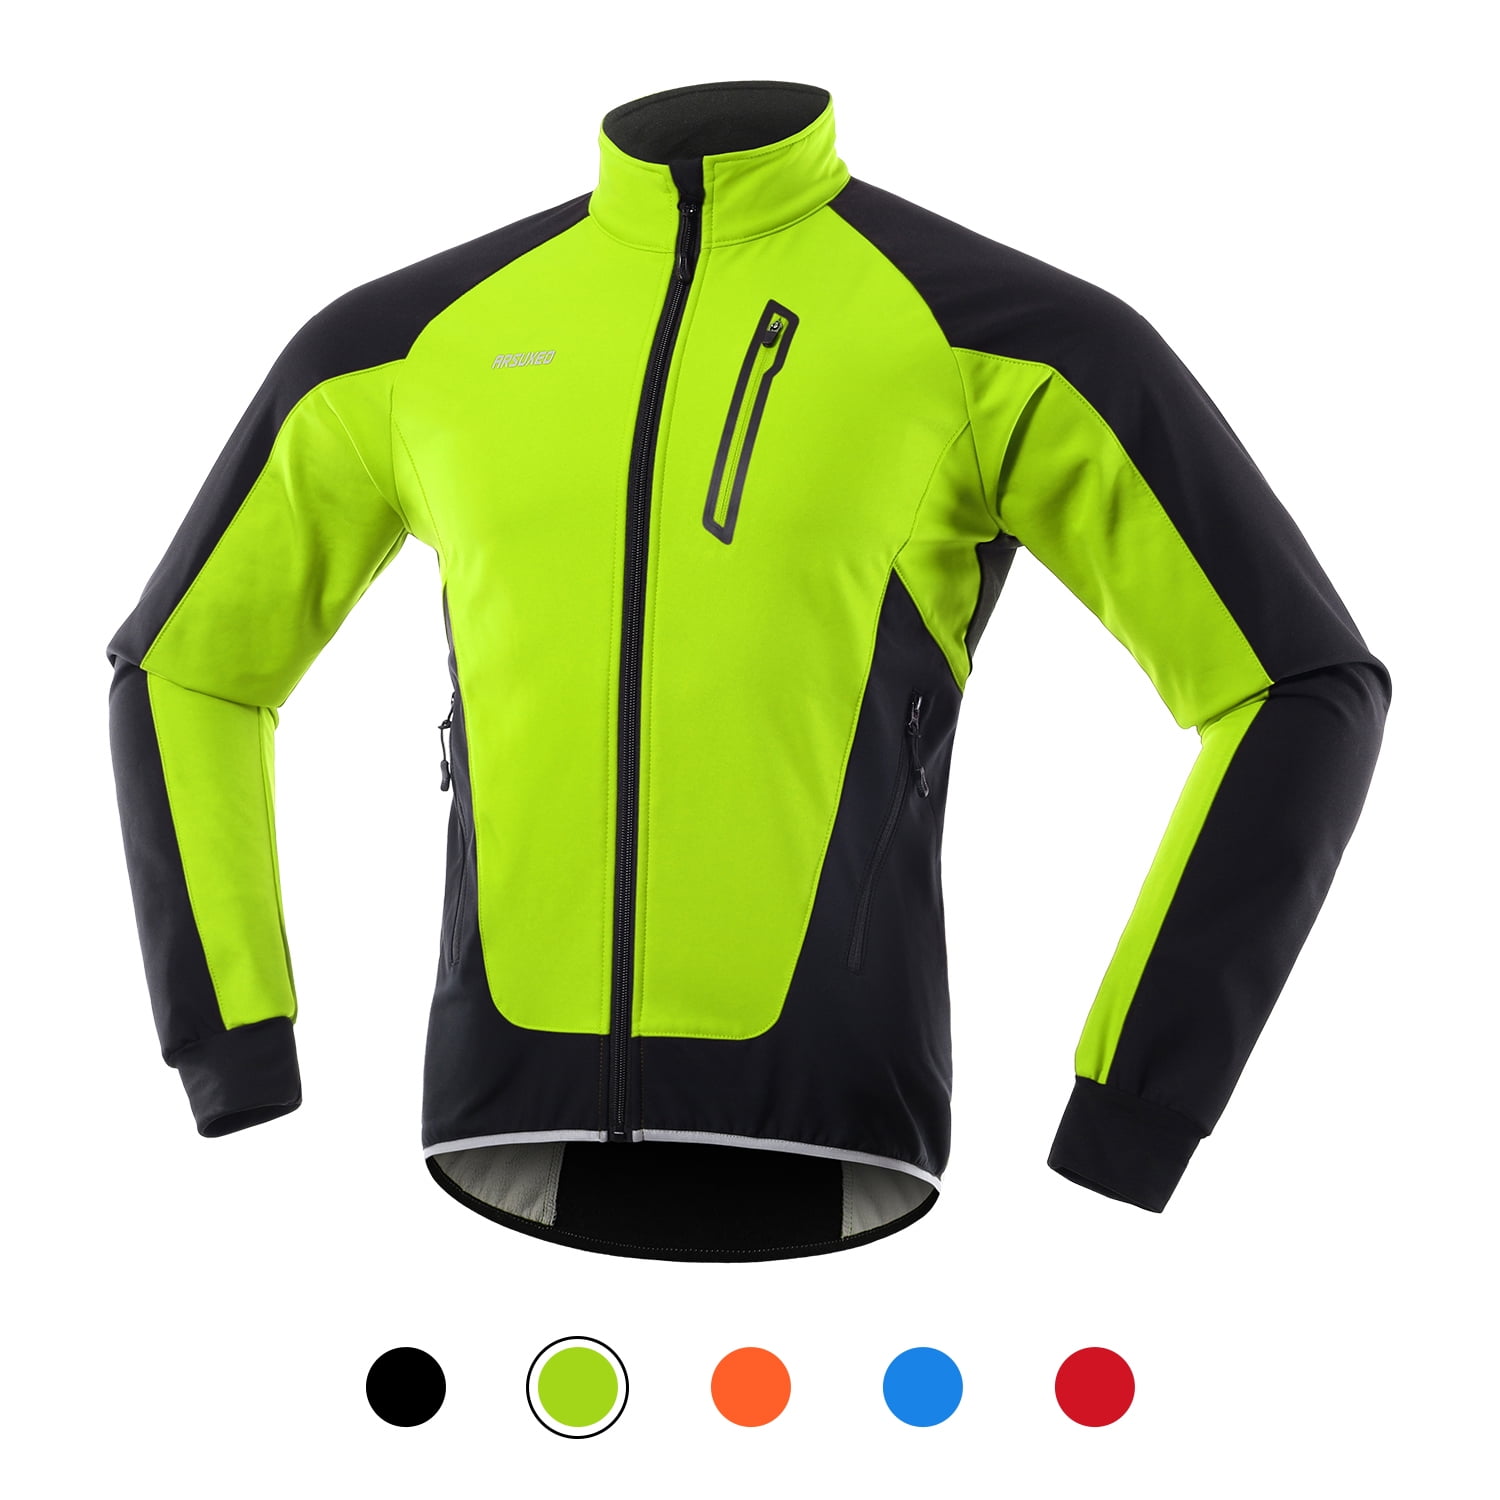 Cycling Jacket Mens Thermal Coat Waterproof High Visibility Three-Layer Composite Warm Thermal Fleece Cycling Jerseys Windproof Reflective Jackets